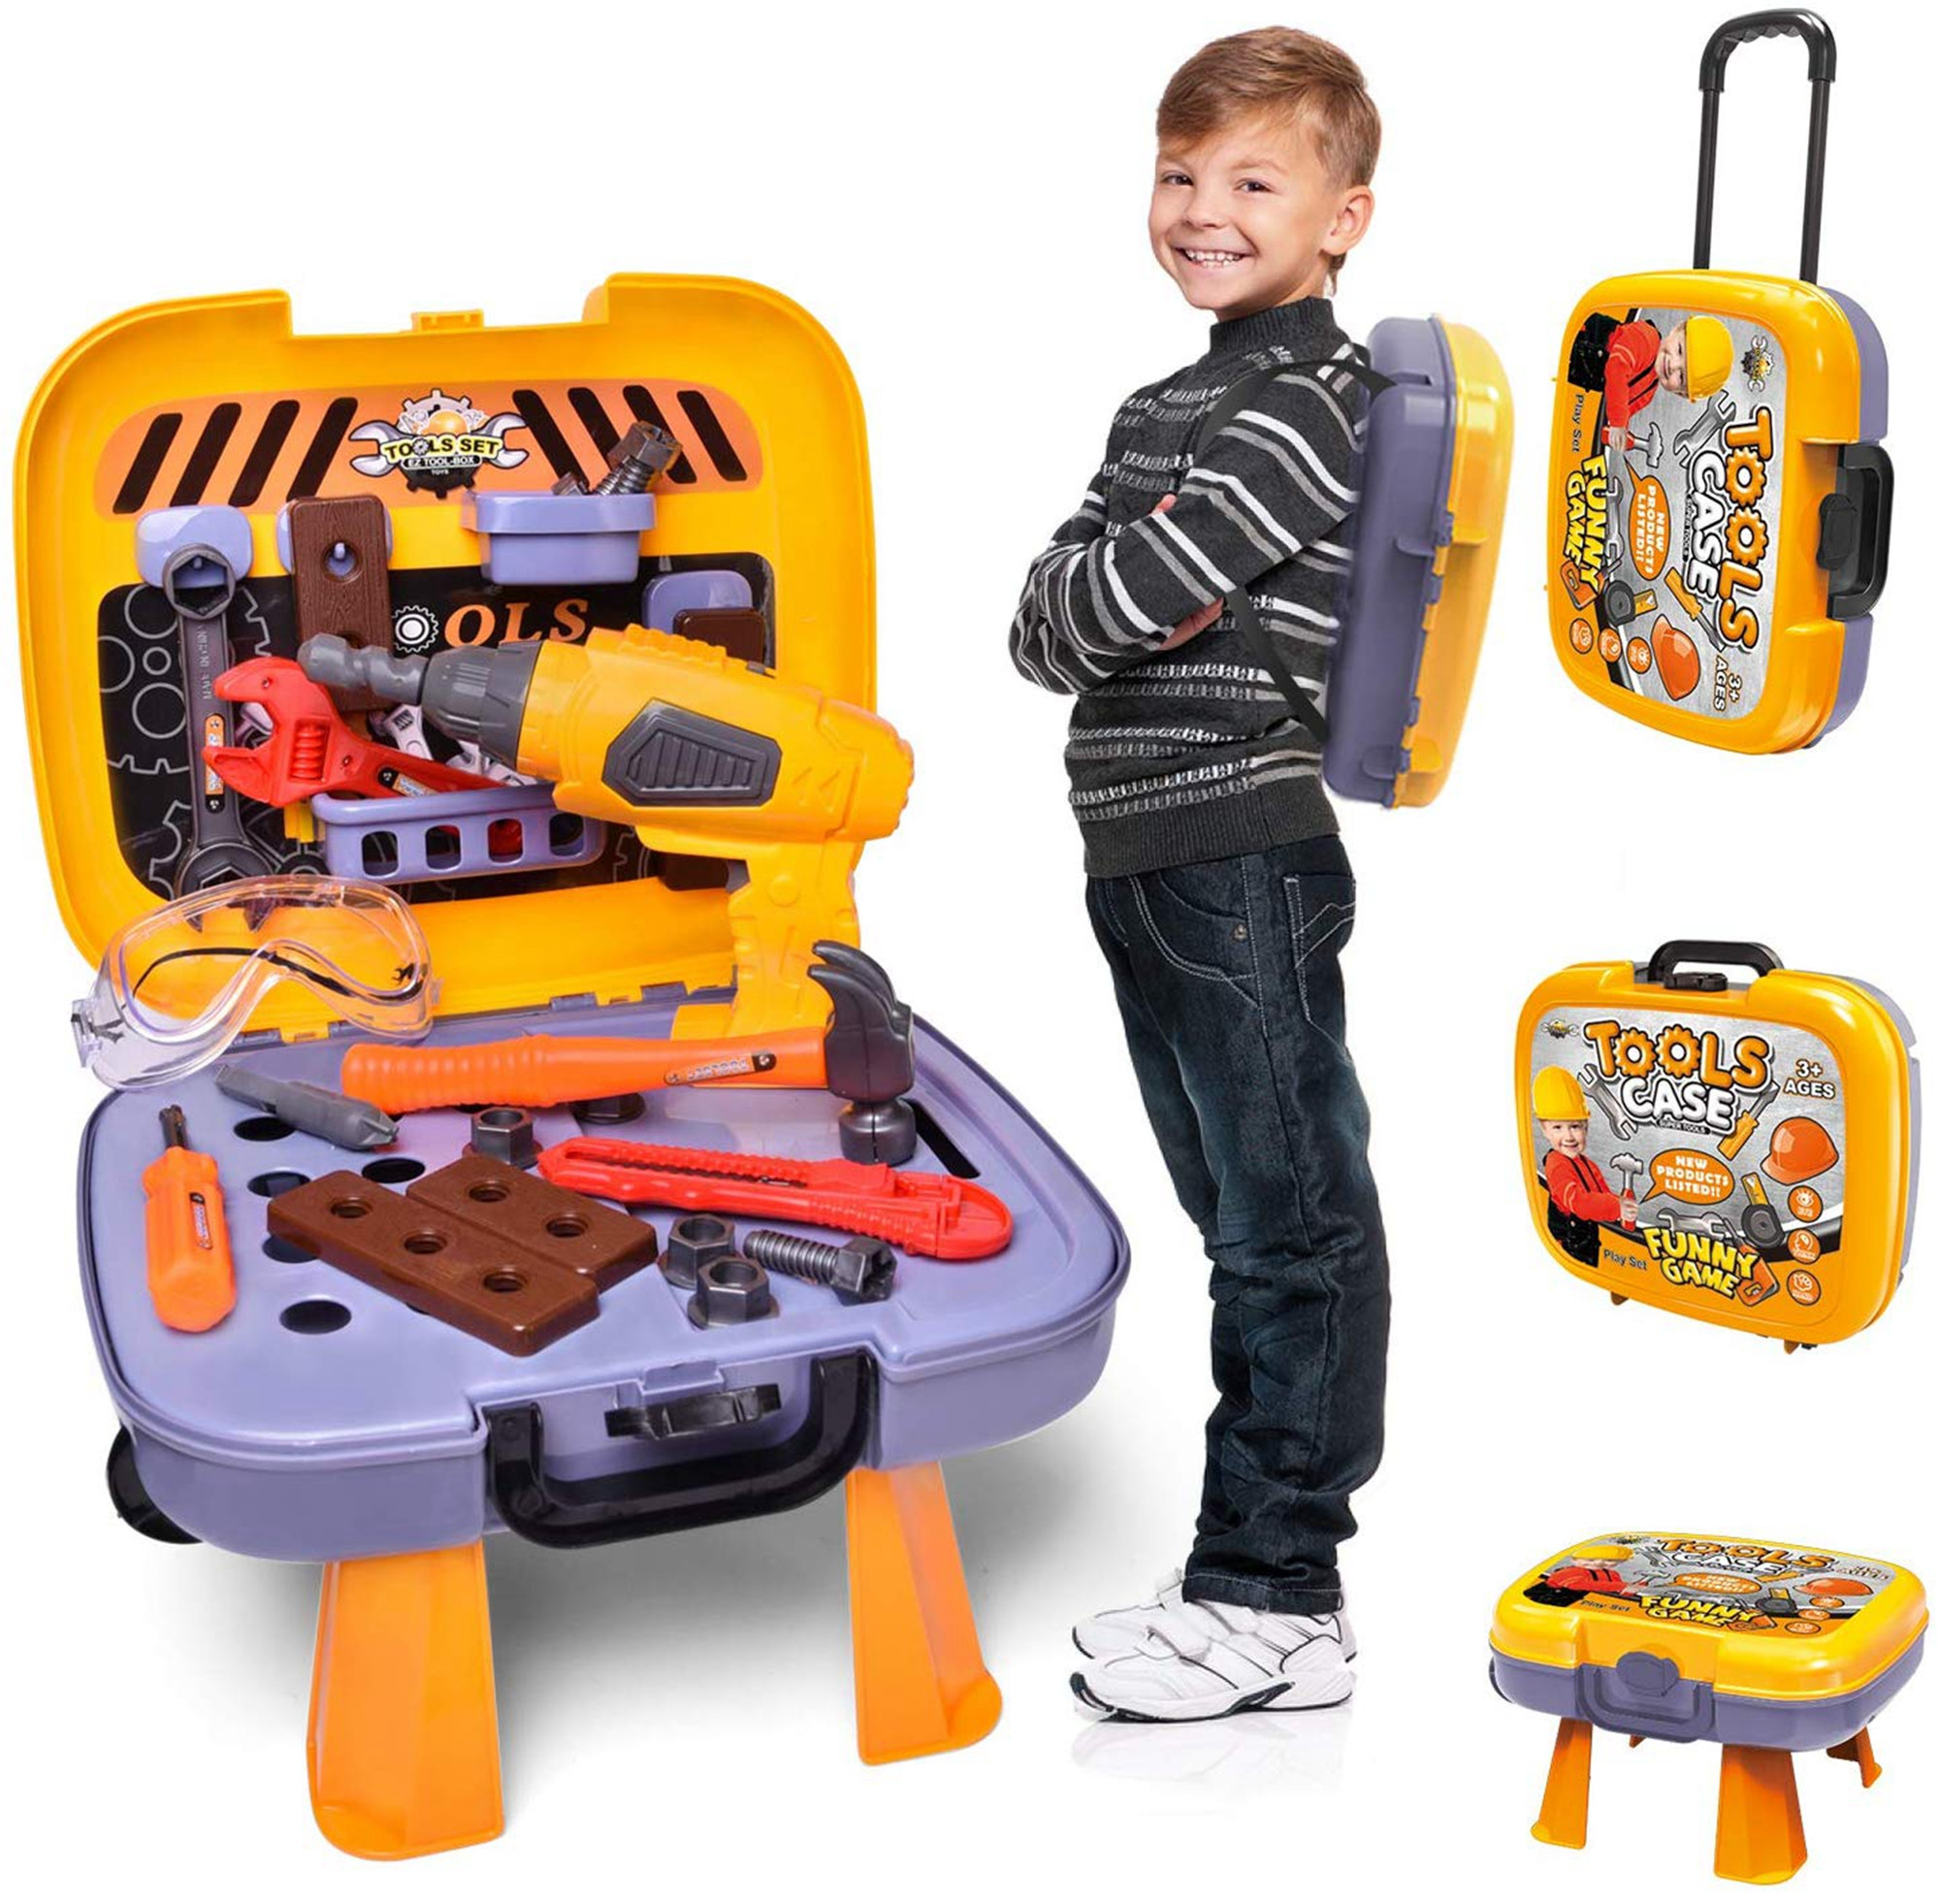 toy gadgets for kids